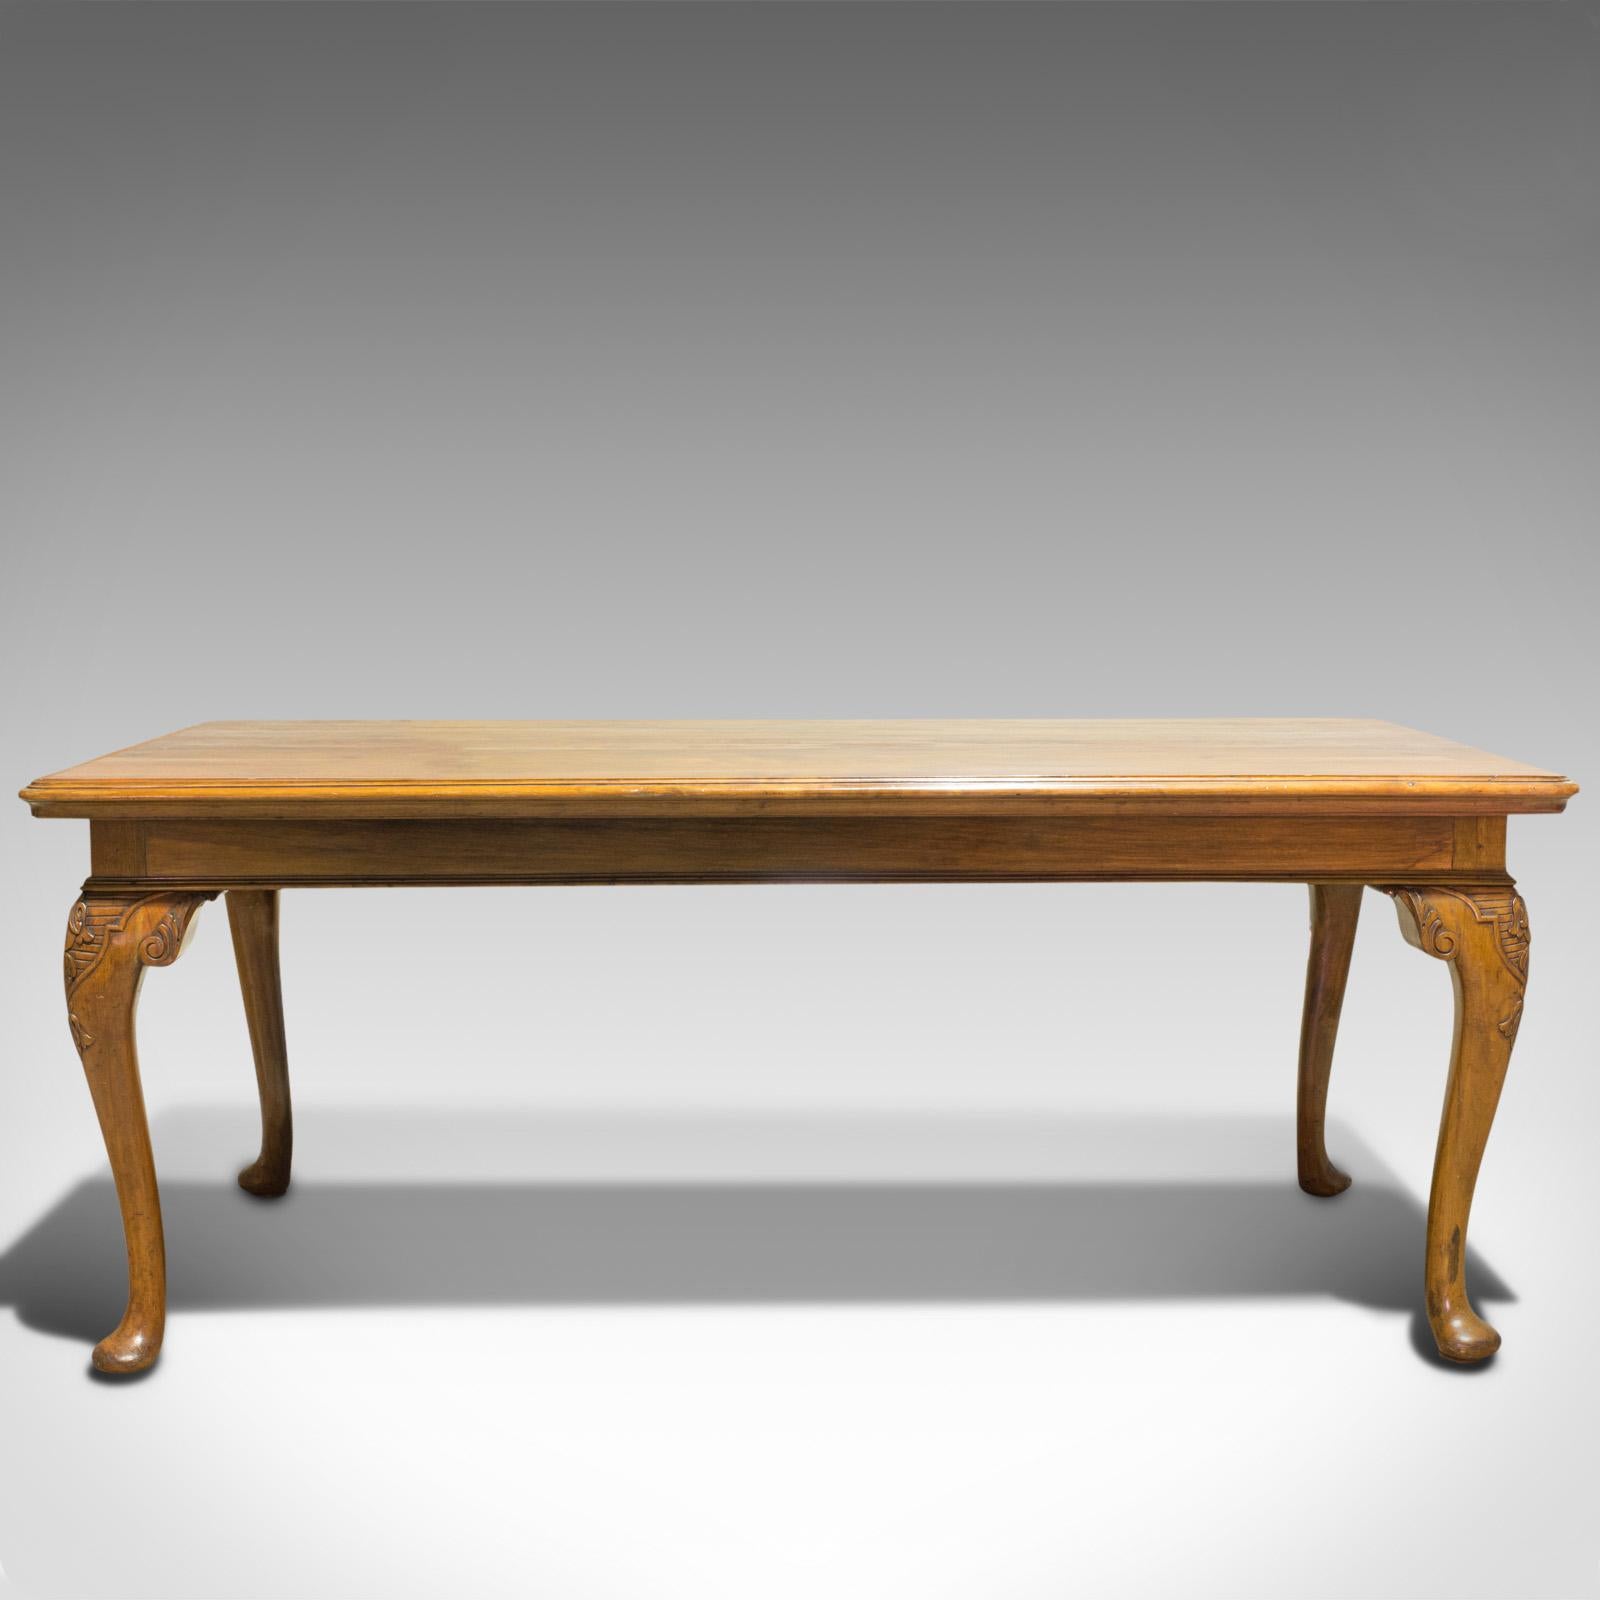 This is a large antique dining table. A French, walnut country house table with seating for 6, dating to the late 19th century, circa 1900.

Impressive, elegant dining table
Displays a desirable aged patina
Select walnut with rich hues and Fine